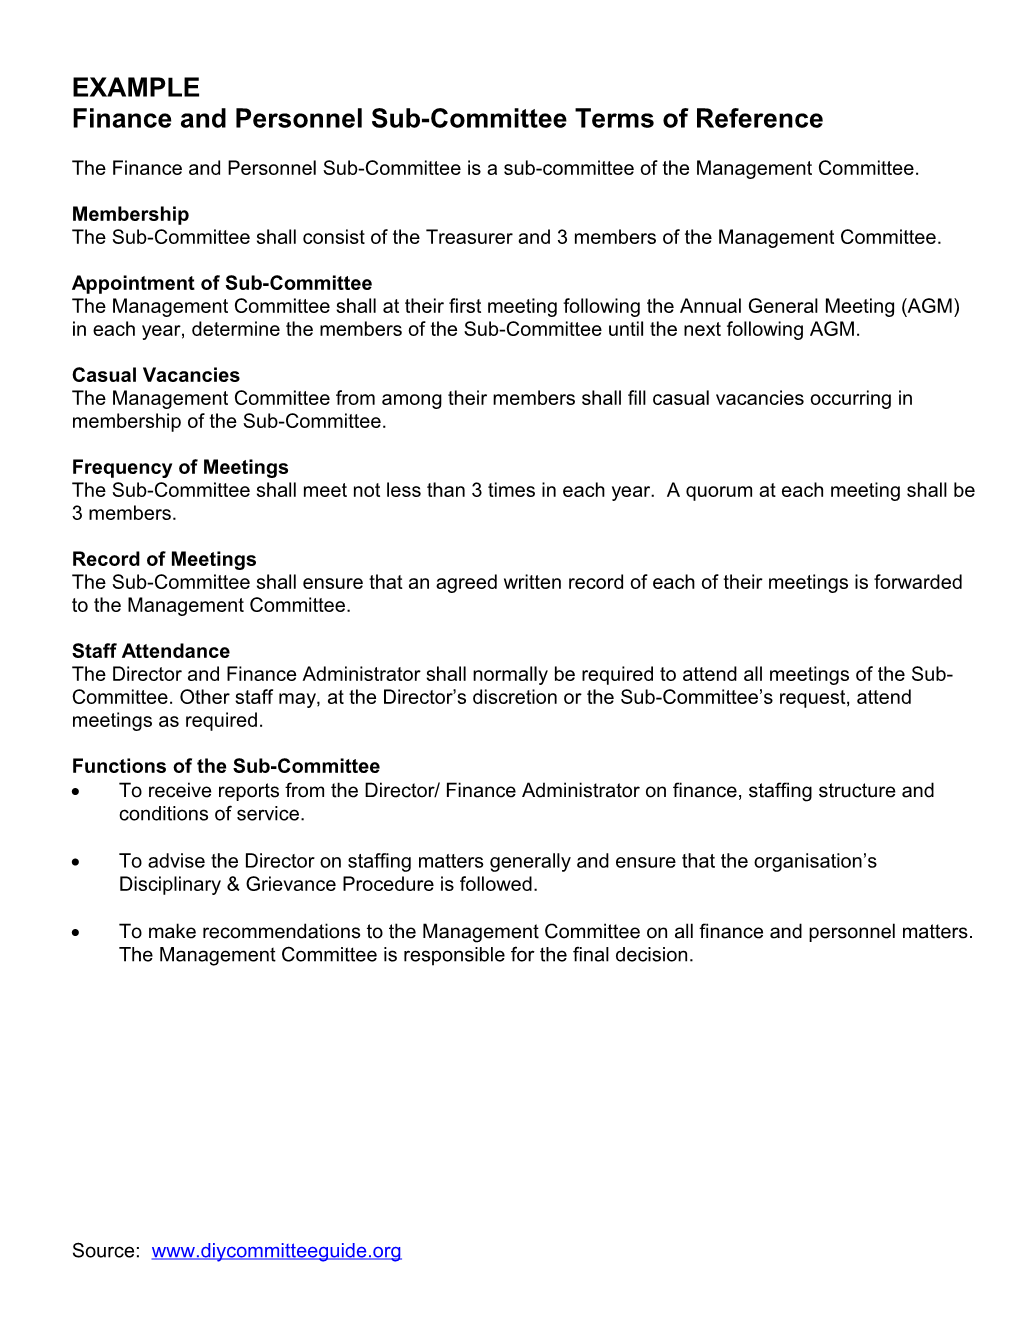 Finance and Personnel Sub-Committee Terms of Reference